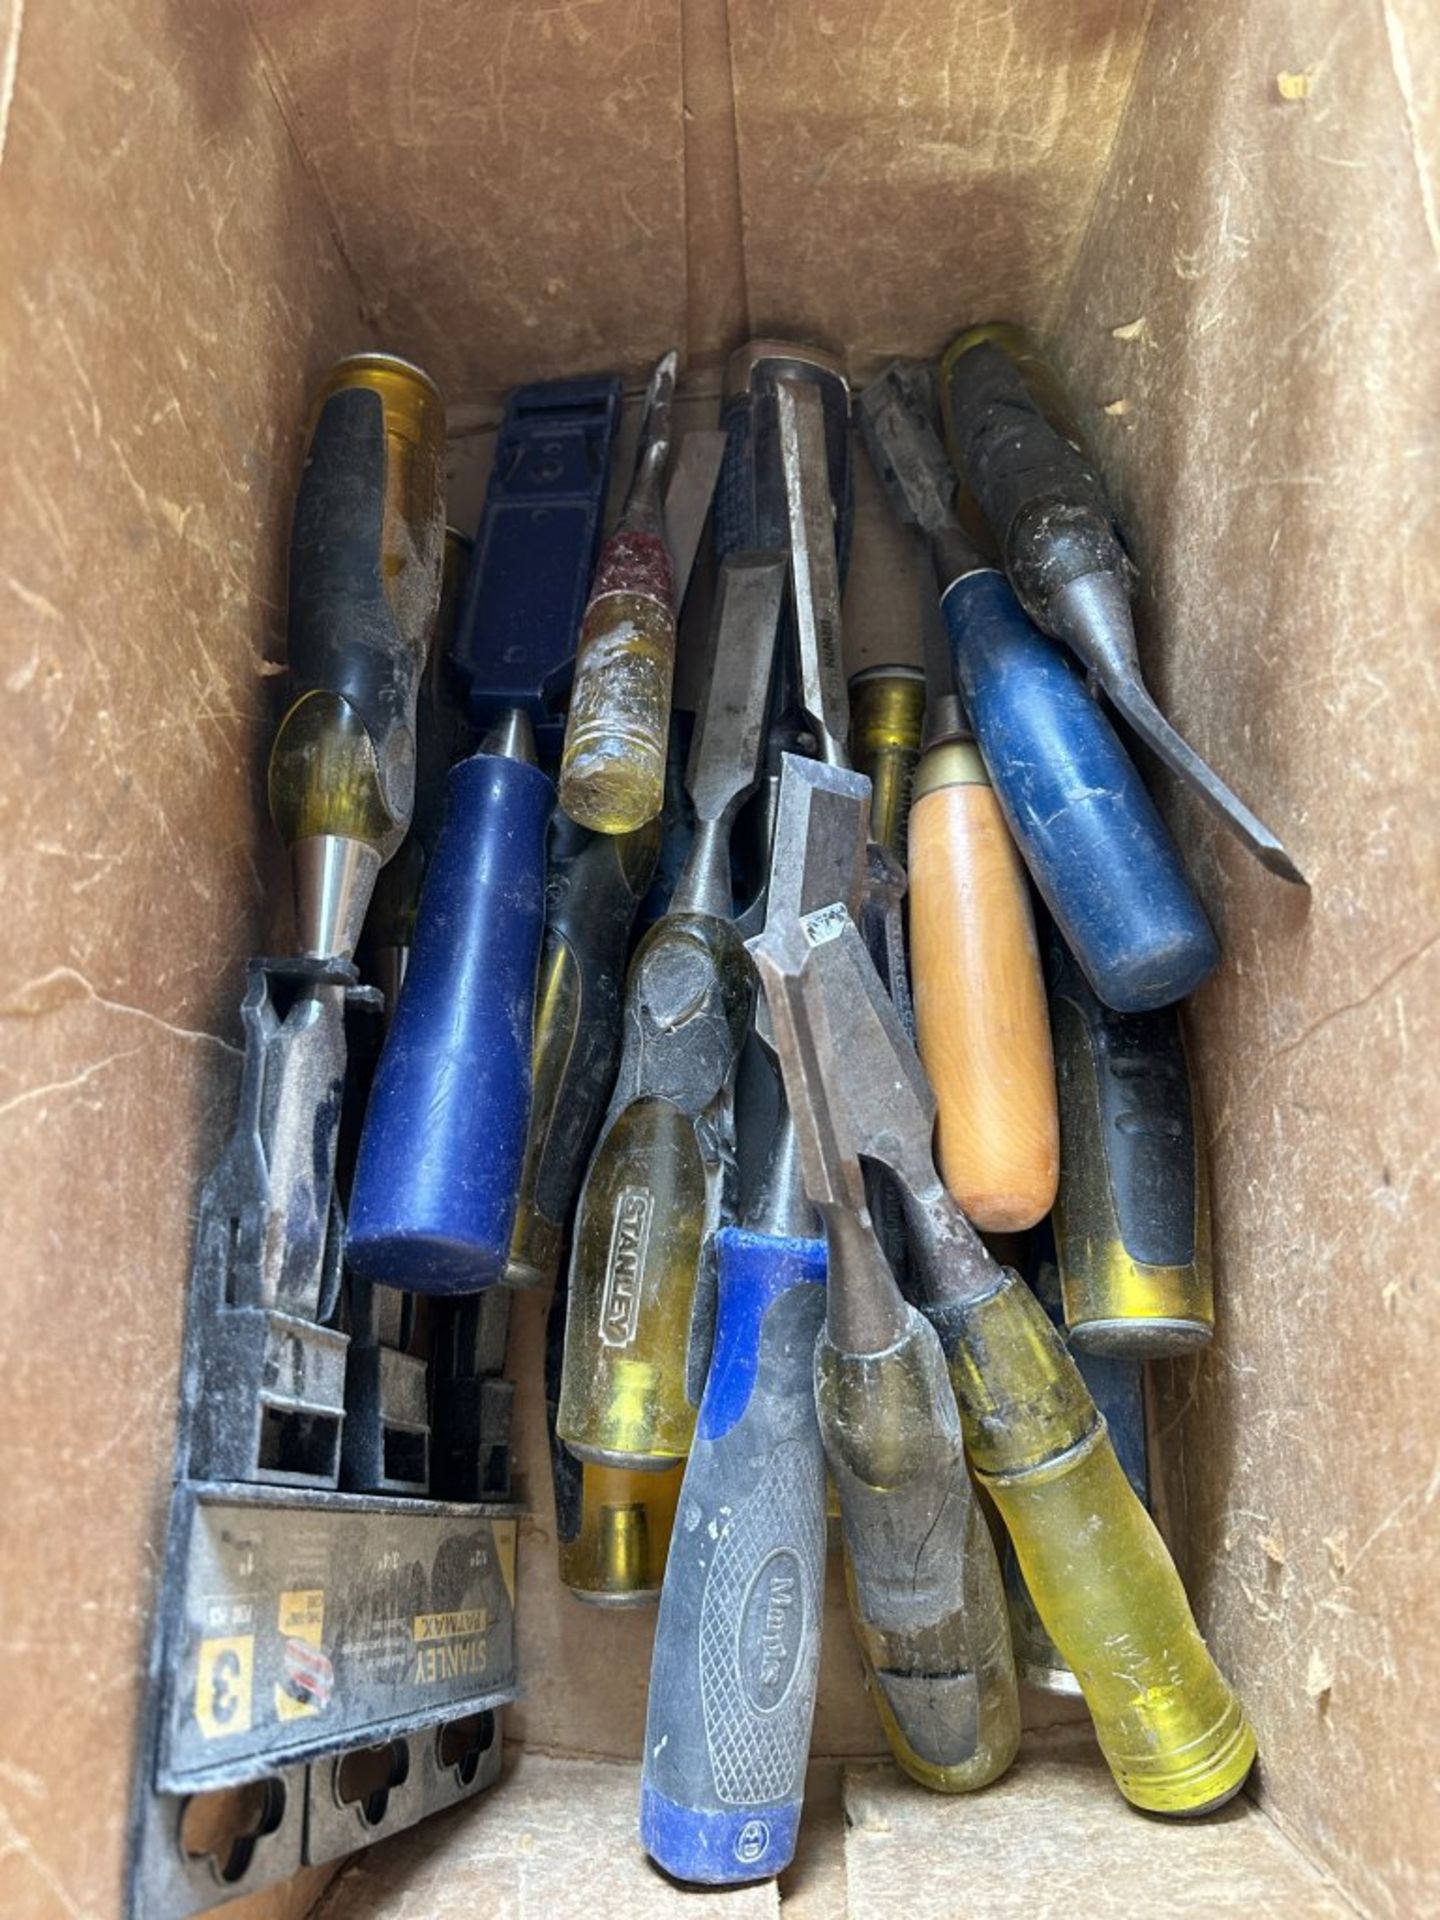 ASSORTED DRILL BITS, DRILL DOCTOR, CHISELS, SCREWDRIVERS, ETC. - Image 3 of 10